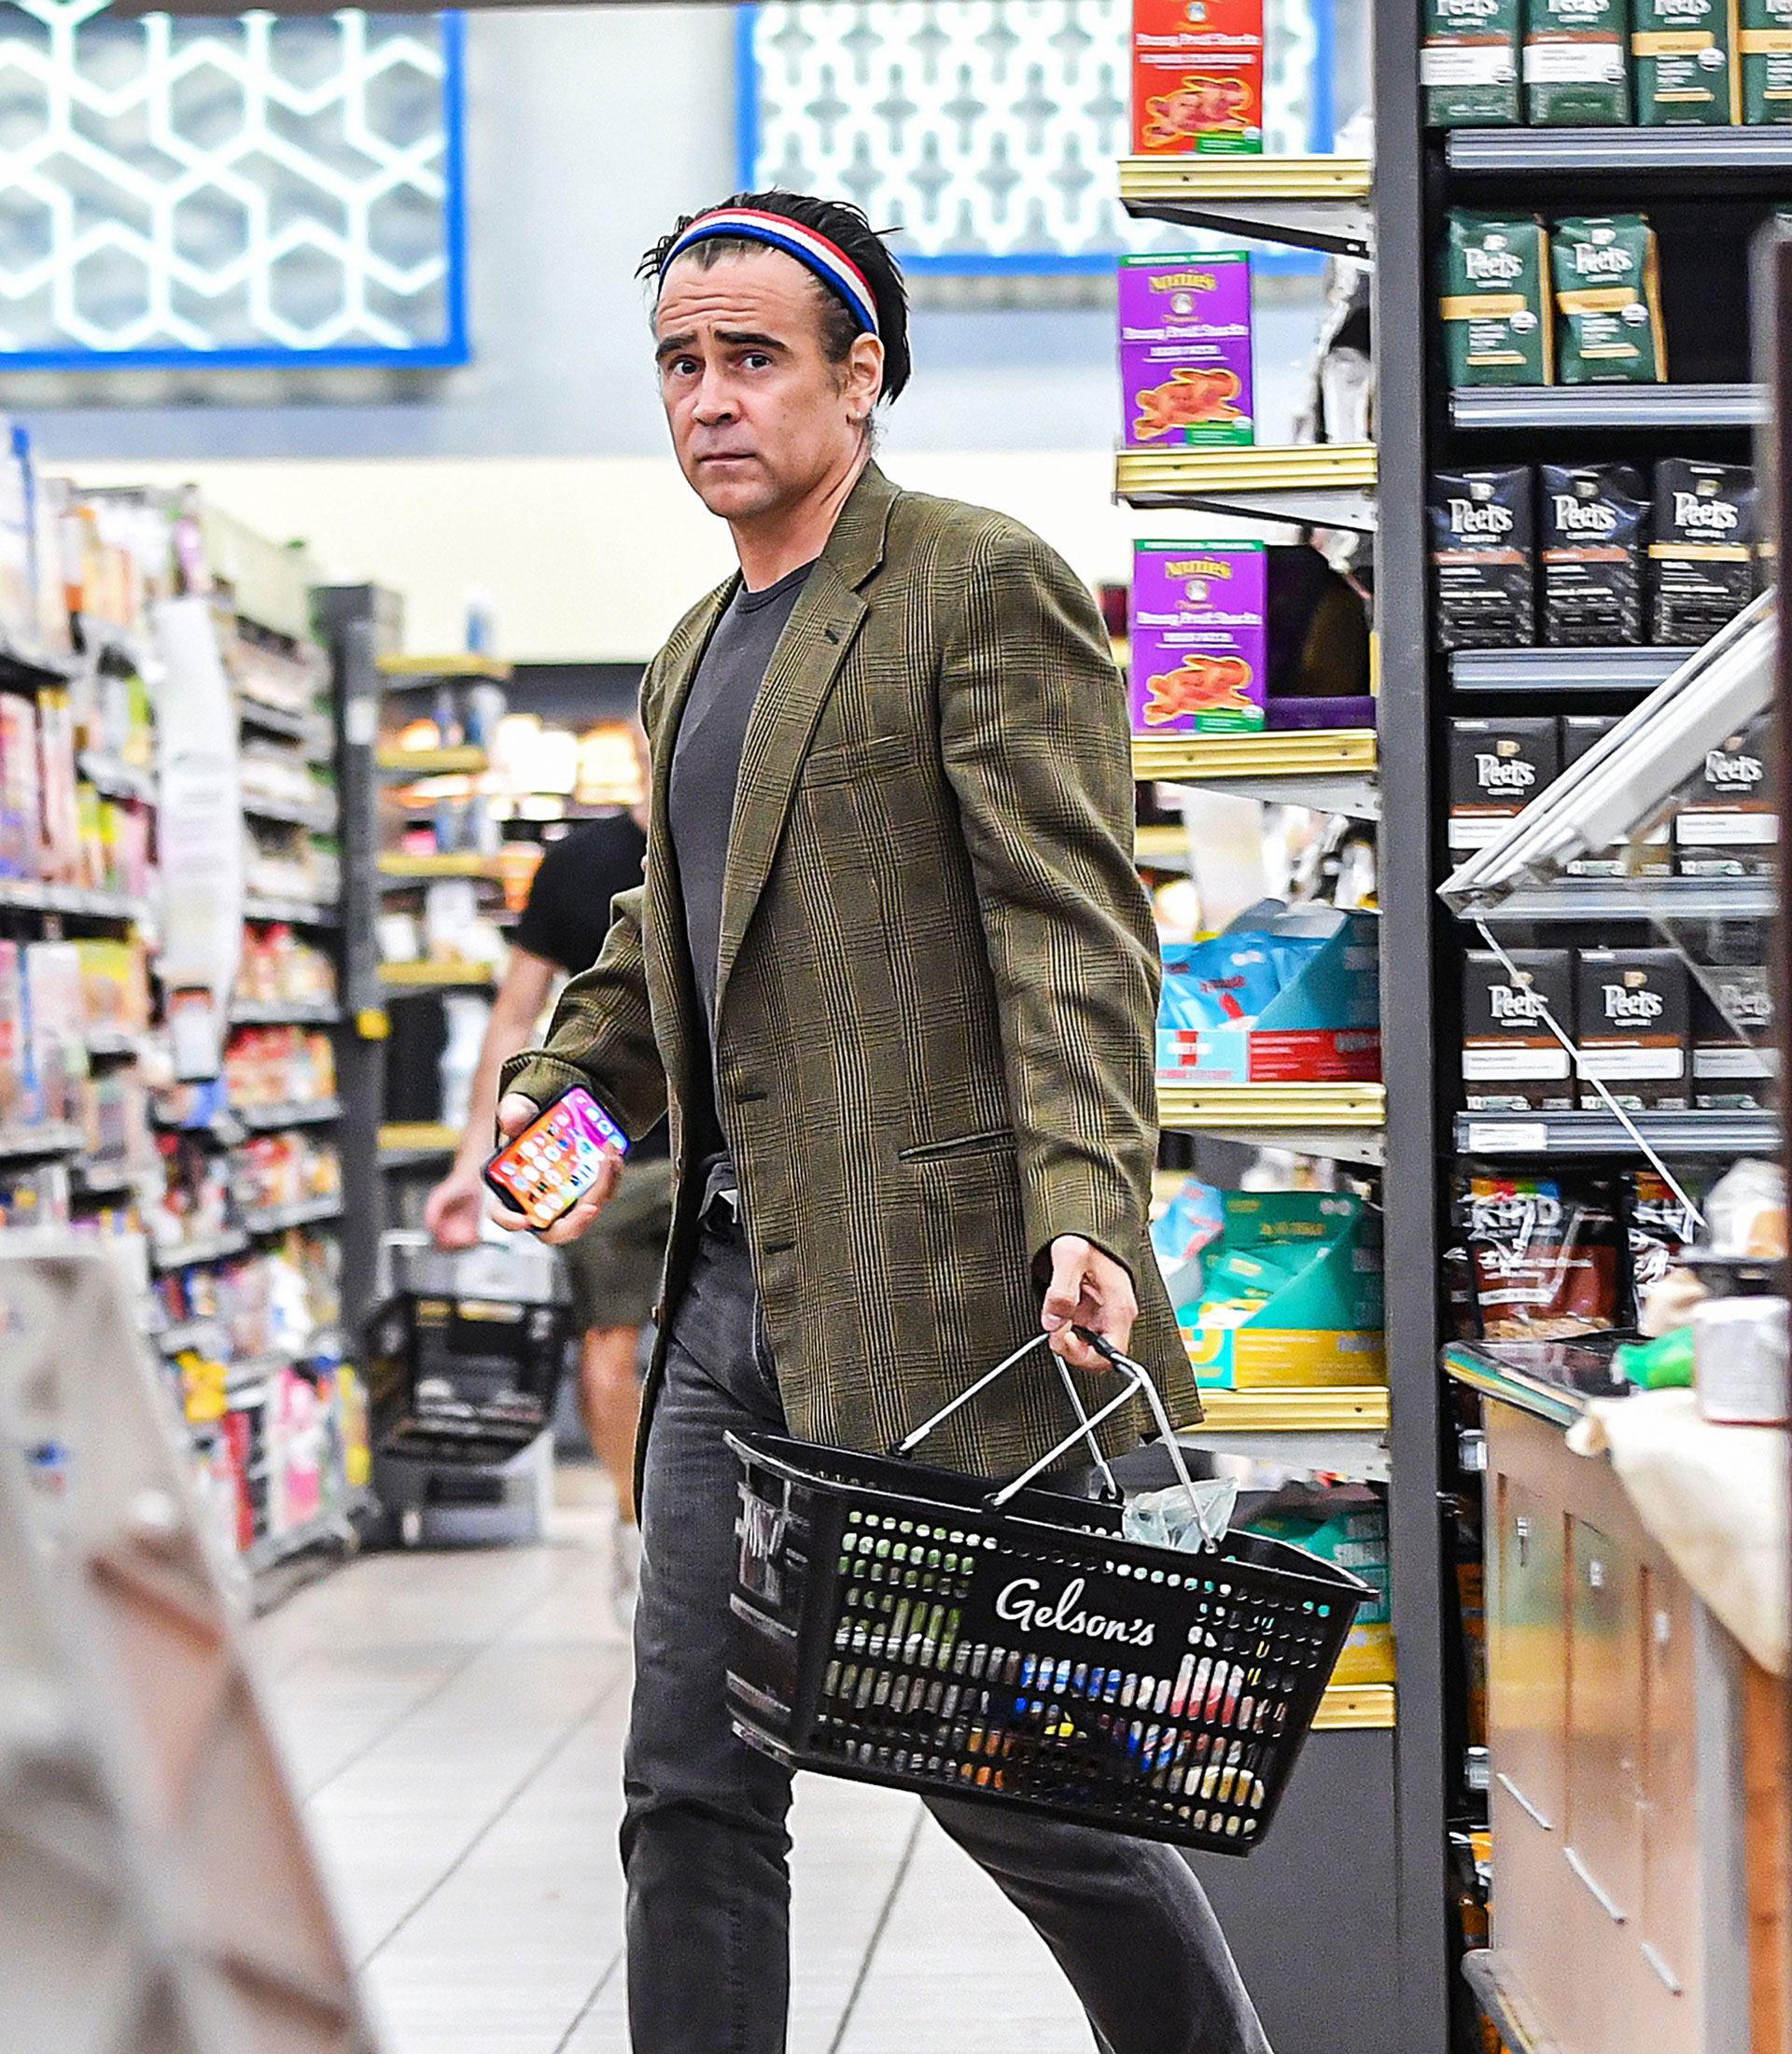 Colin Farrell was photographed doing his daily shopping at a Los Angeles supermarket.  The actor wore a casual look of jeans and a shirt, and a checkered jacket.  In addition, he wore a colored headband to hold his hair